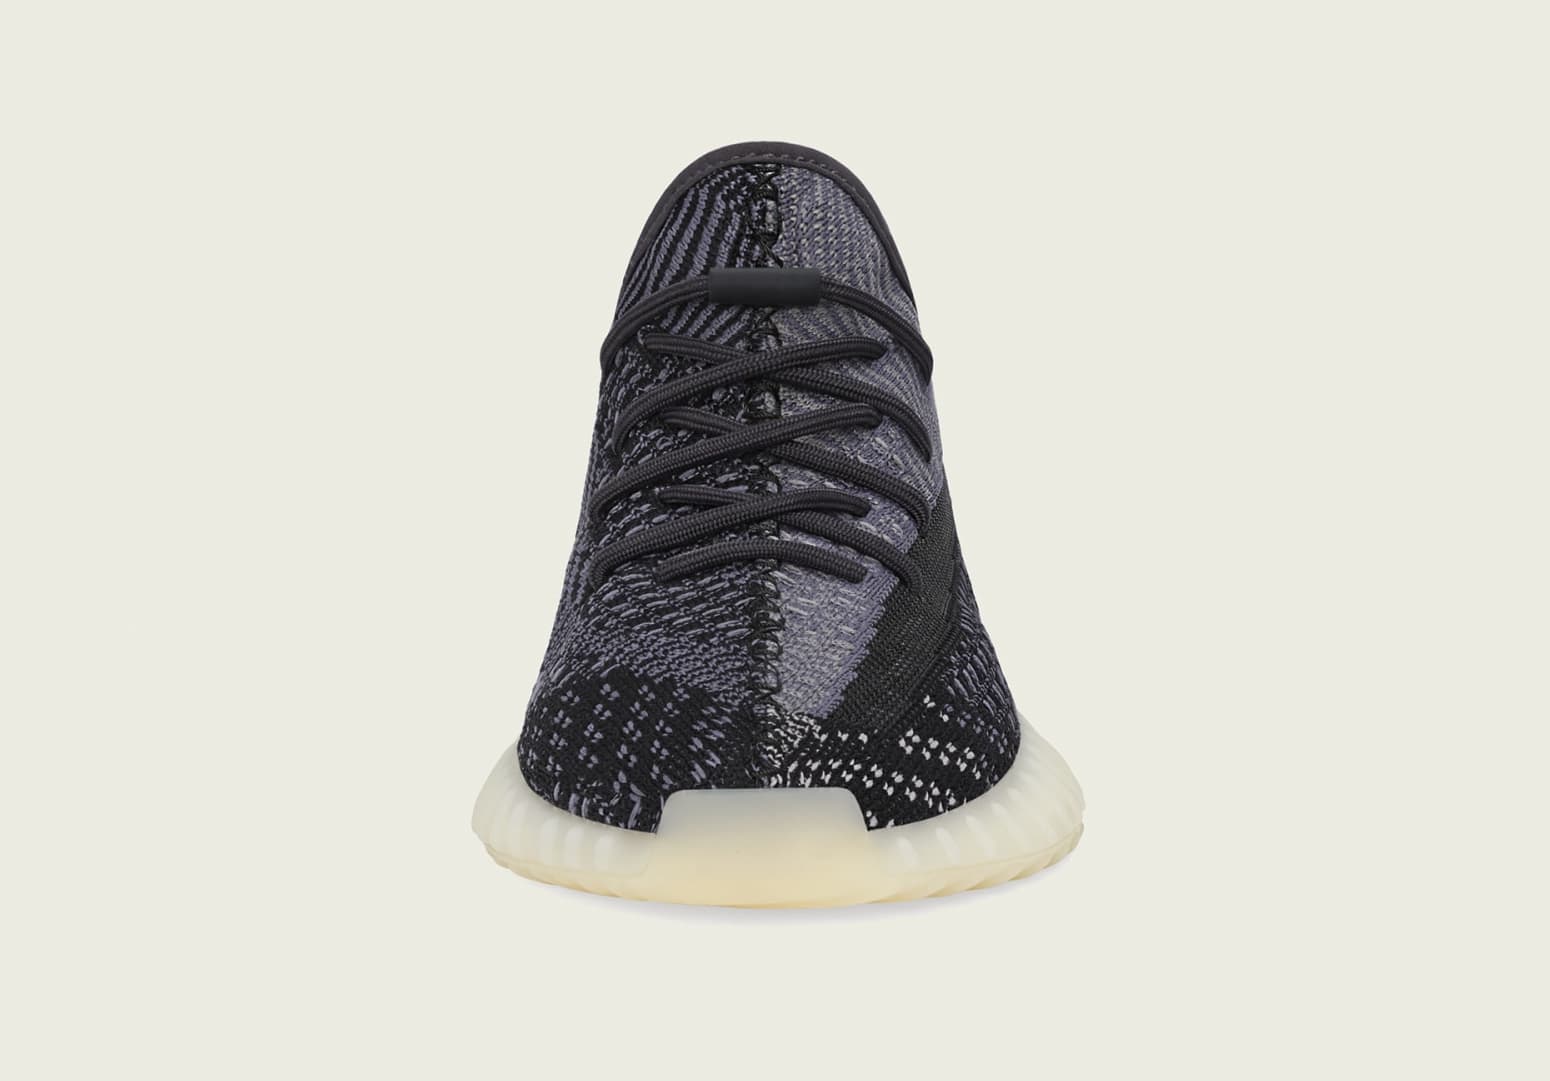 Adidas Yeezy boost 350 V2 'Carbon' FZ5000 Front